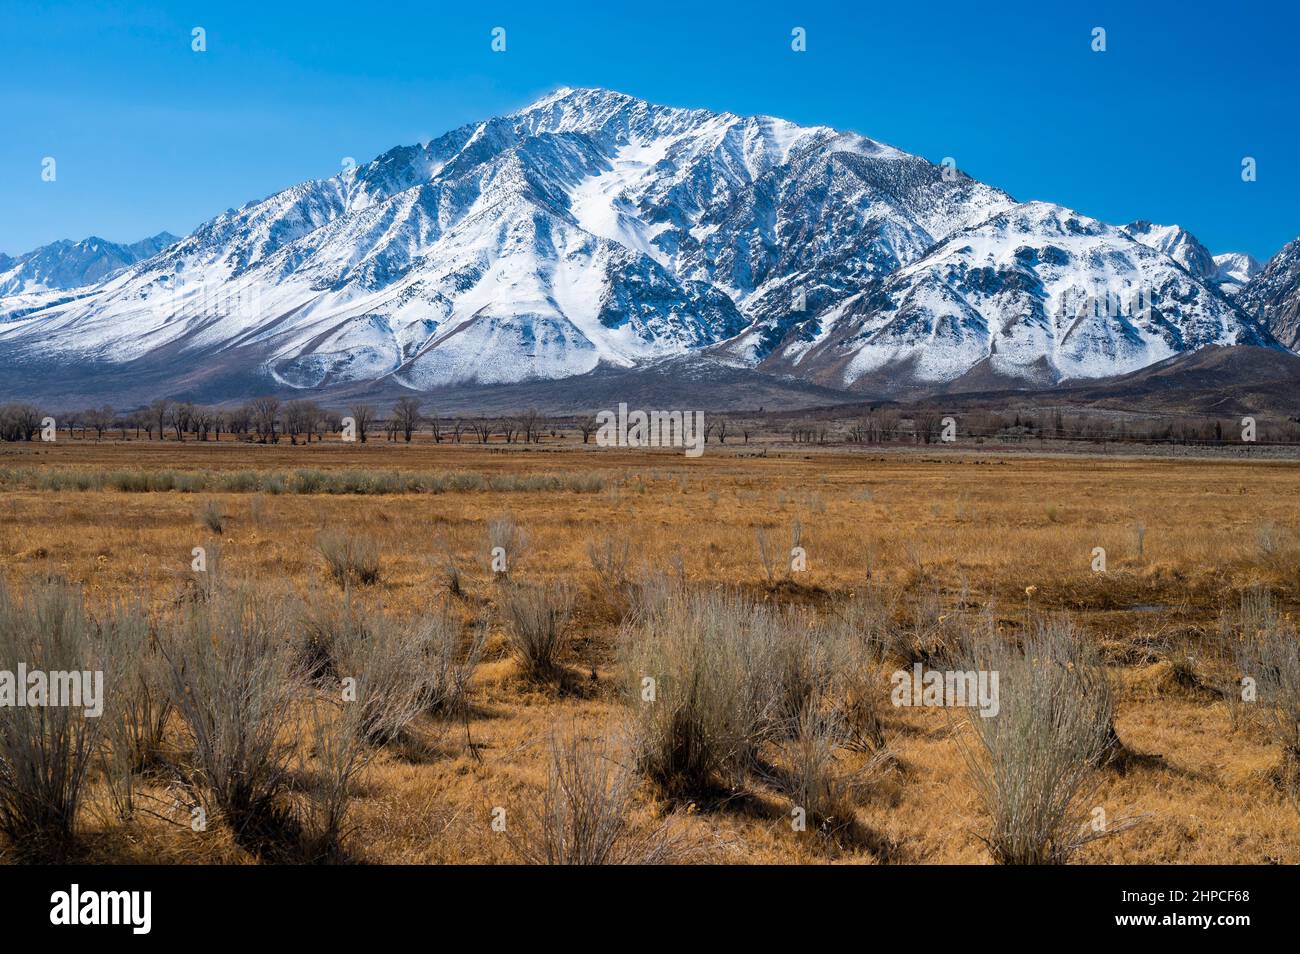 Eastern Sierra Mountains Covered in Snow Stock Photo